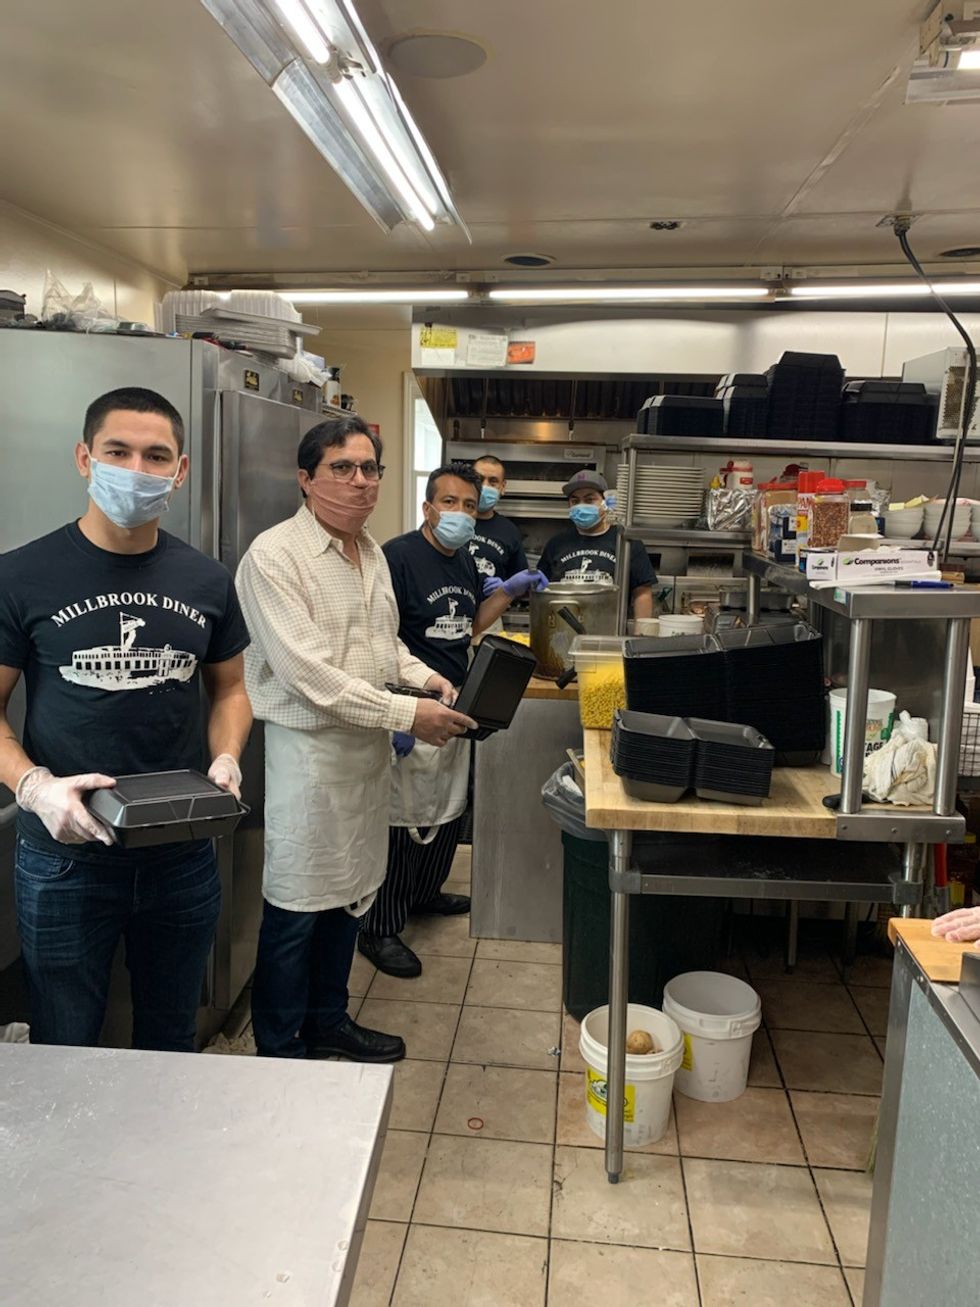 The Millbrook Diner feeds the hungry during COVID-19 crisis